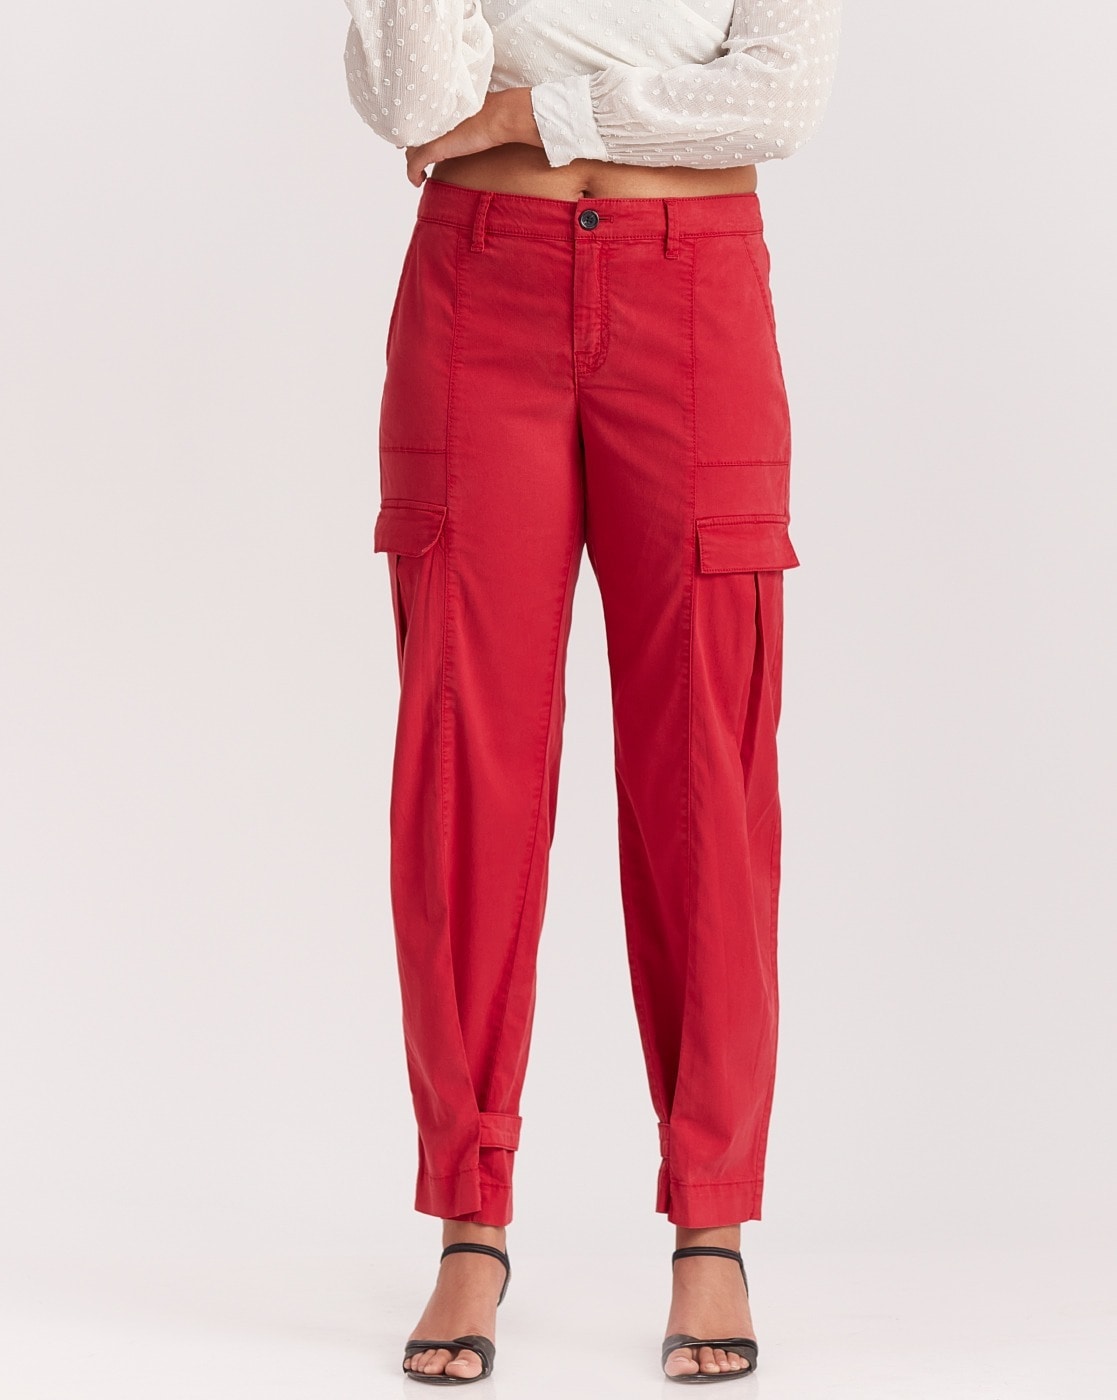 Red Pocket Detail Cargo Pants  Pants  PrettyLittleThing USA